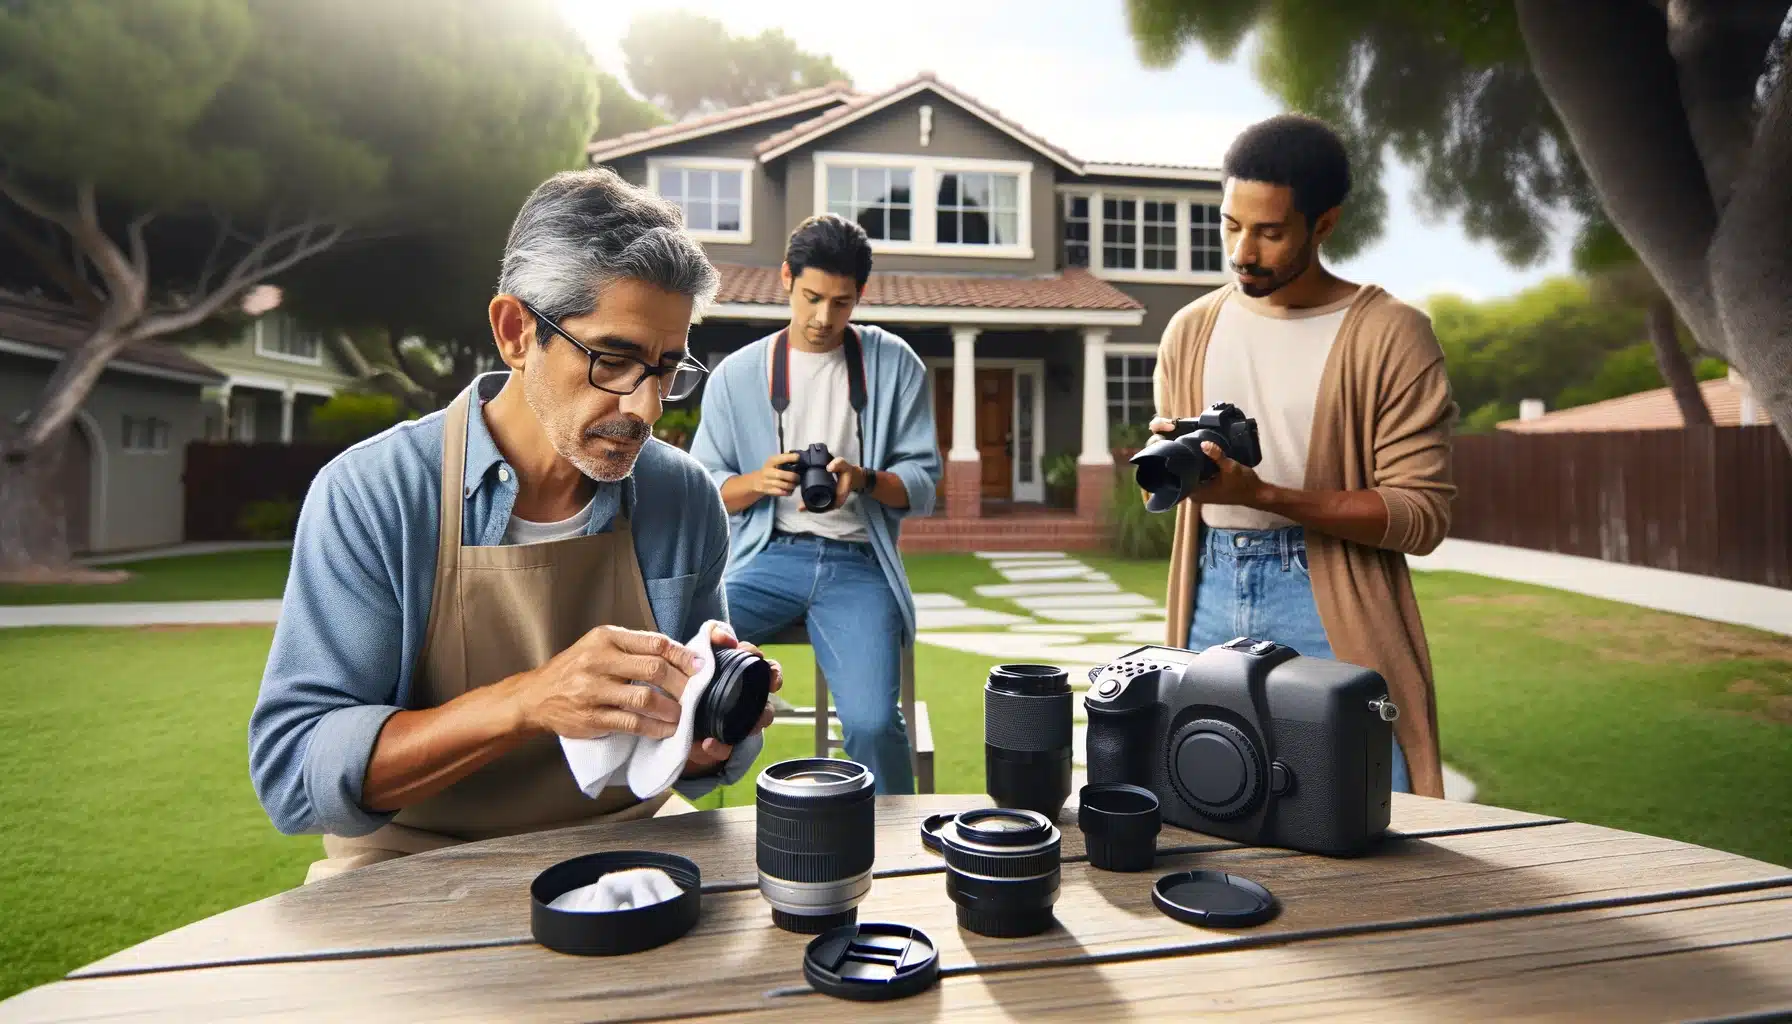 A middle-aged Hispanic male cleans a camera lens with precision in a suburban outdoor setting, while a young Caucasian male and an African female photograph the home's exterior and nature, highlighting effective lens cleaning techniques for spotless shooting.